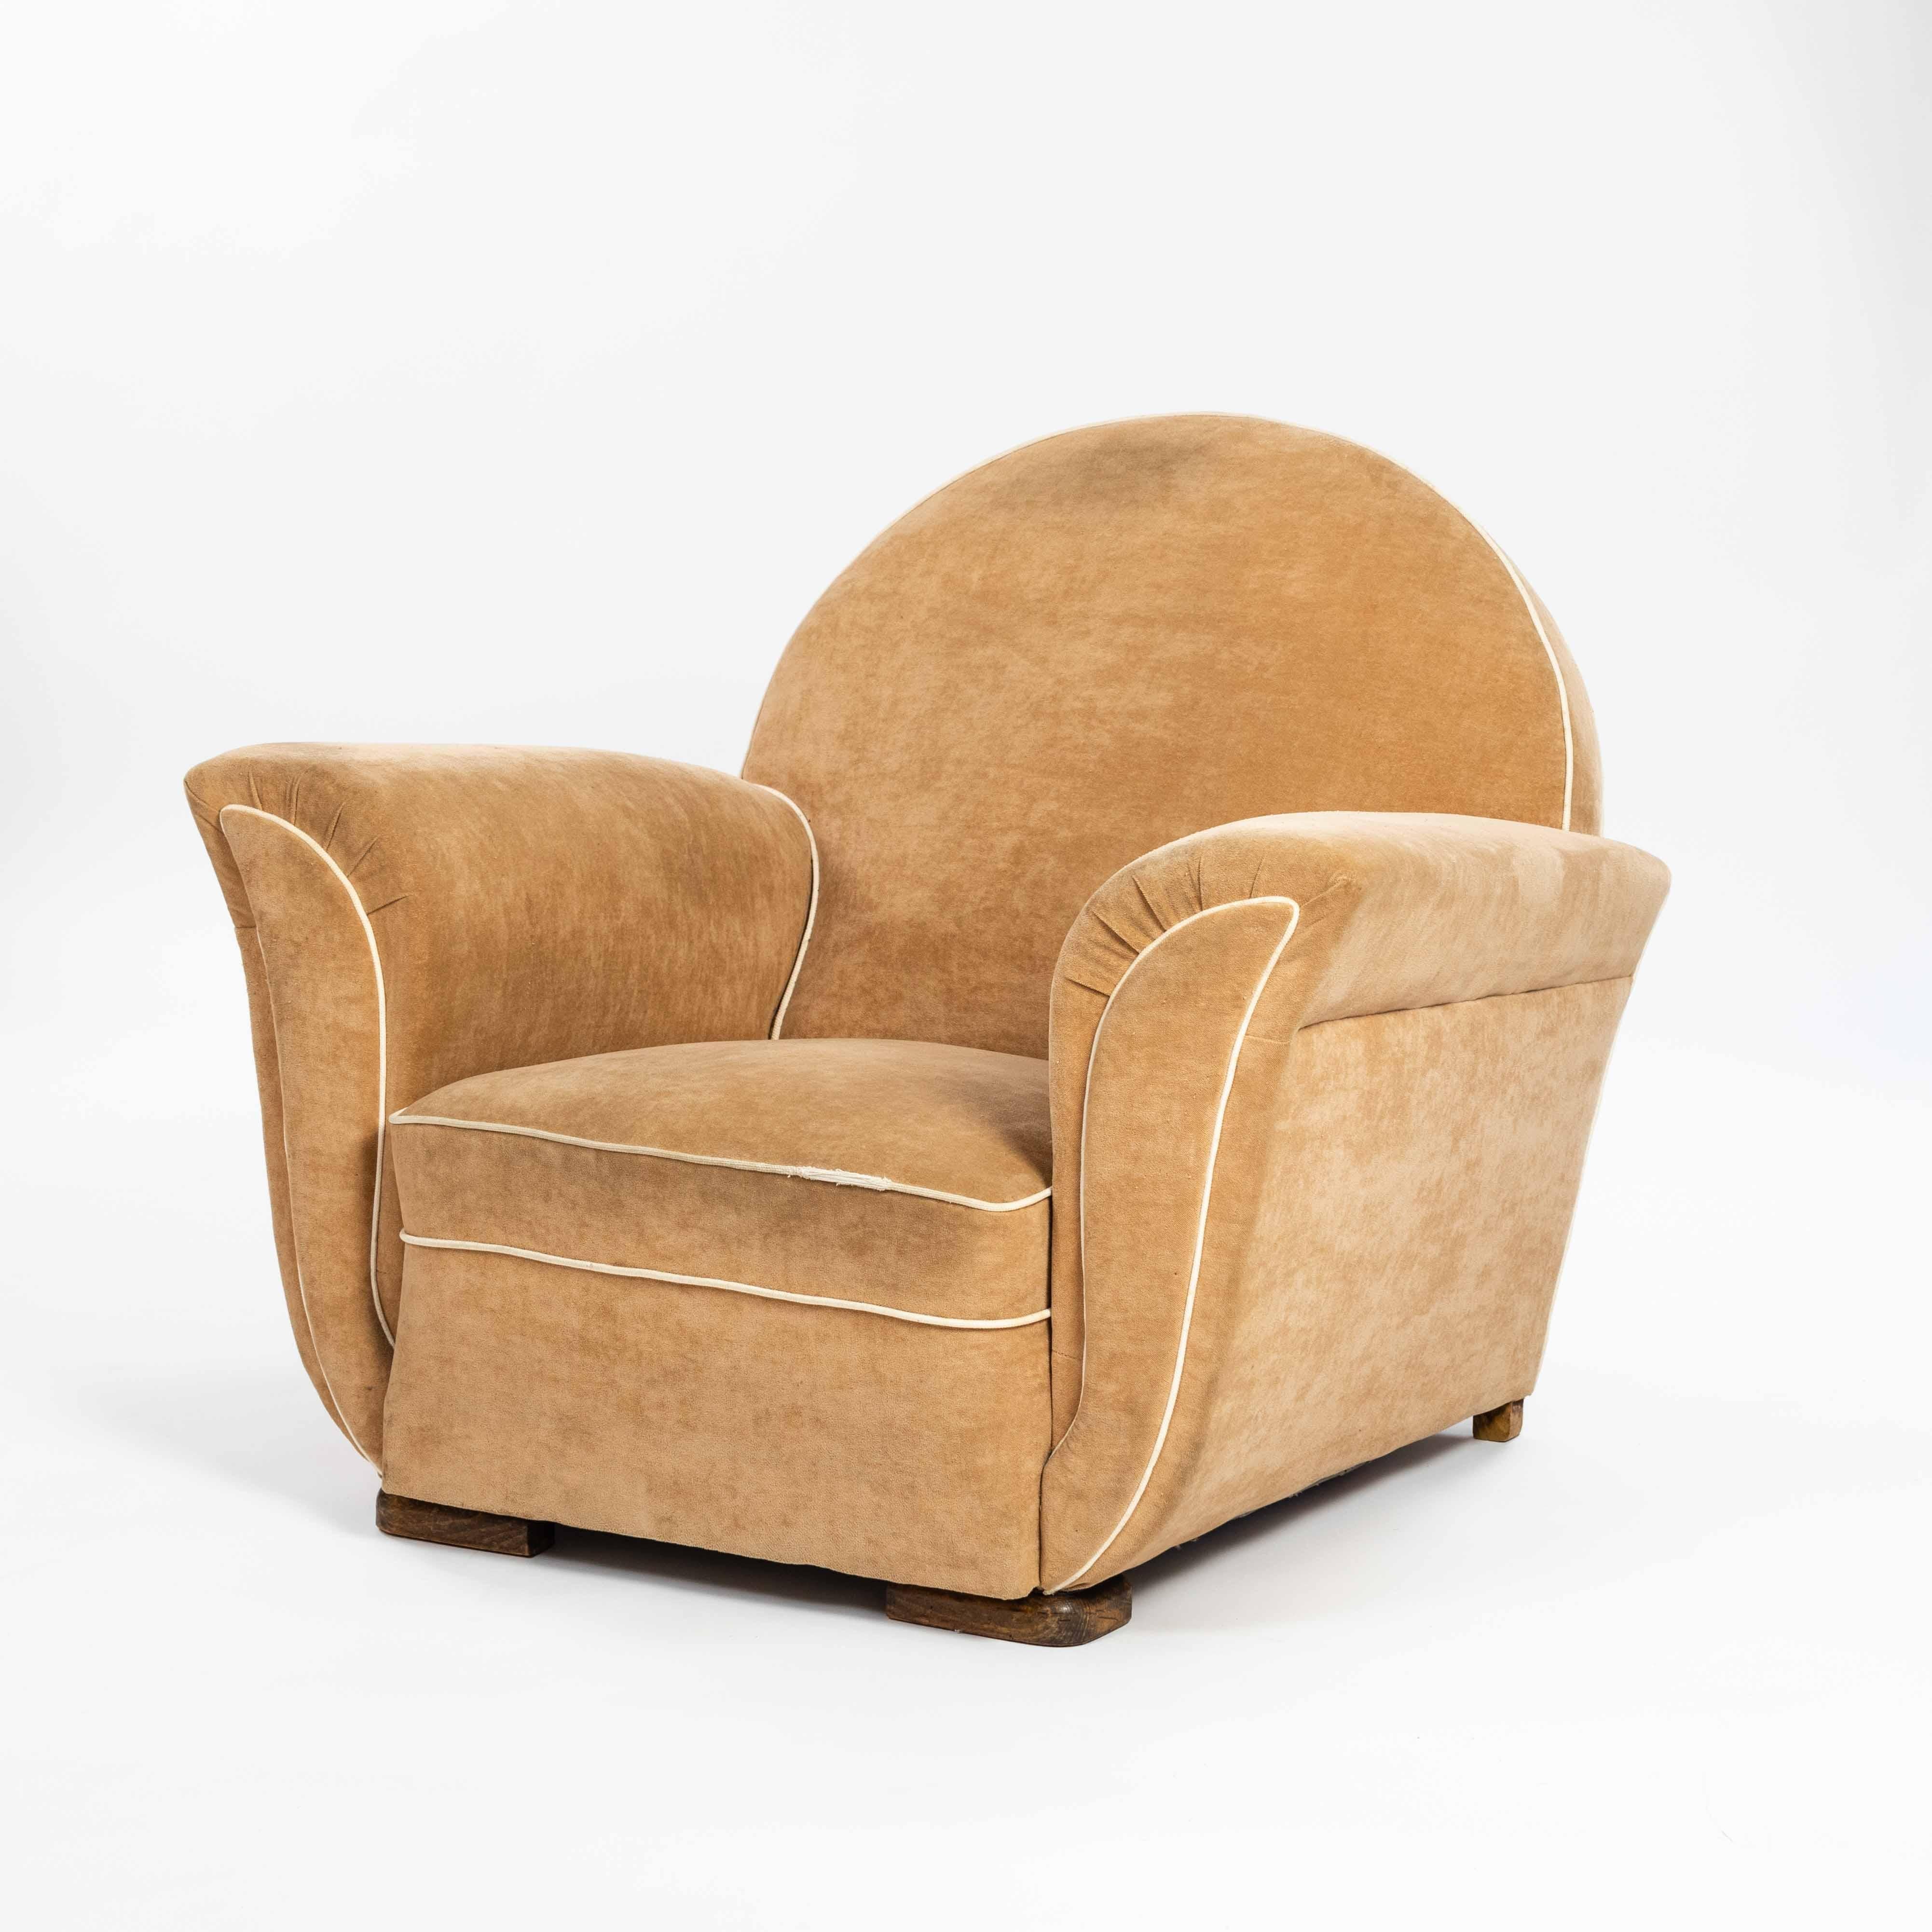 Pair of generous and rare Art Deco armchairs from France of the 1930-ies.
Like a tulip, the armchairs open sideways through the outwardly curved armrests, the incorporated piping emphasizes the shape again. Despite their stately size, the armchairs